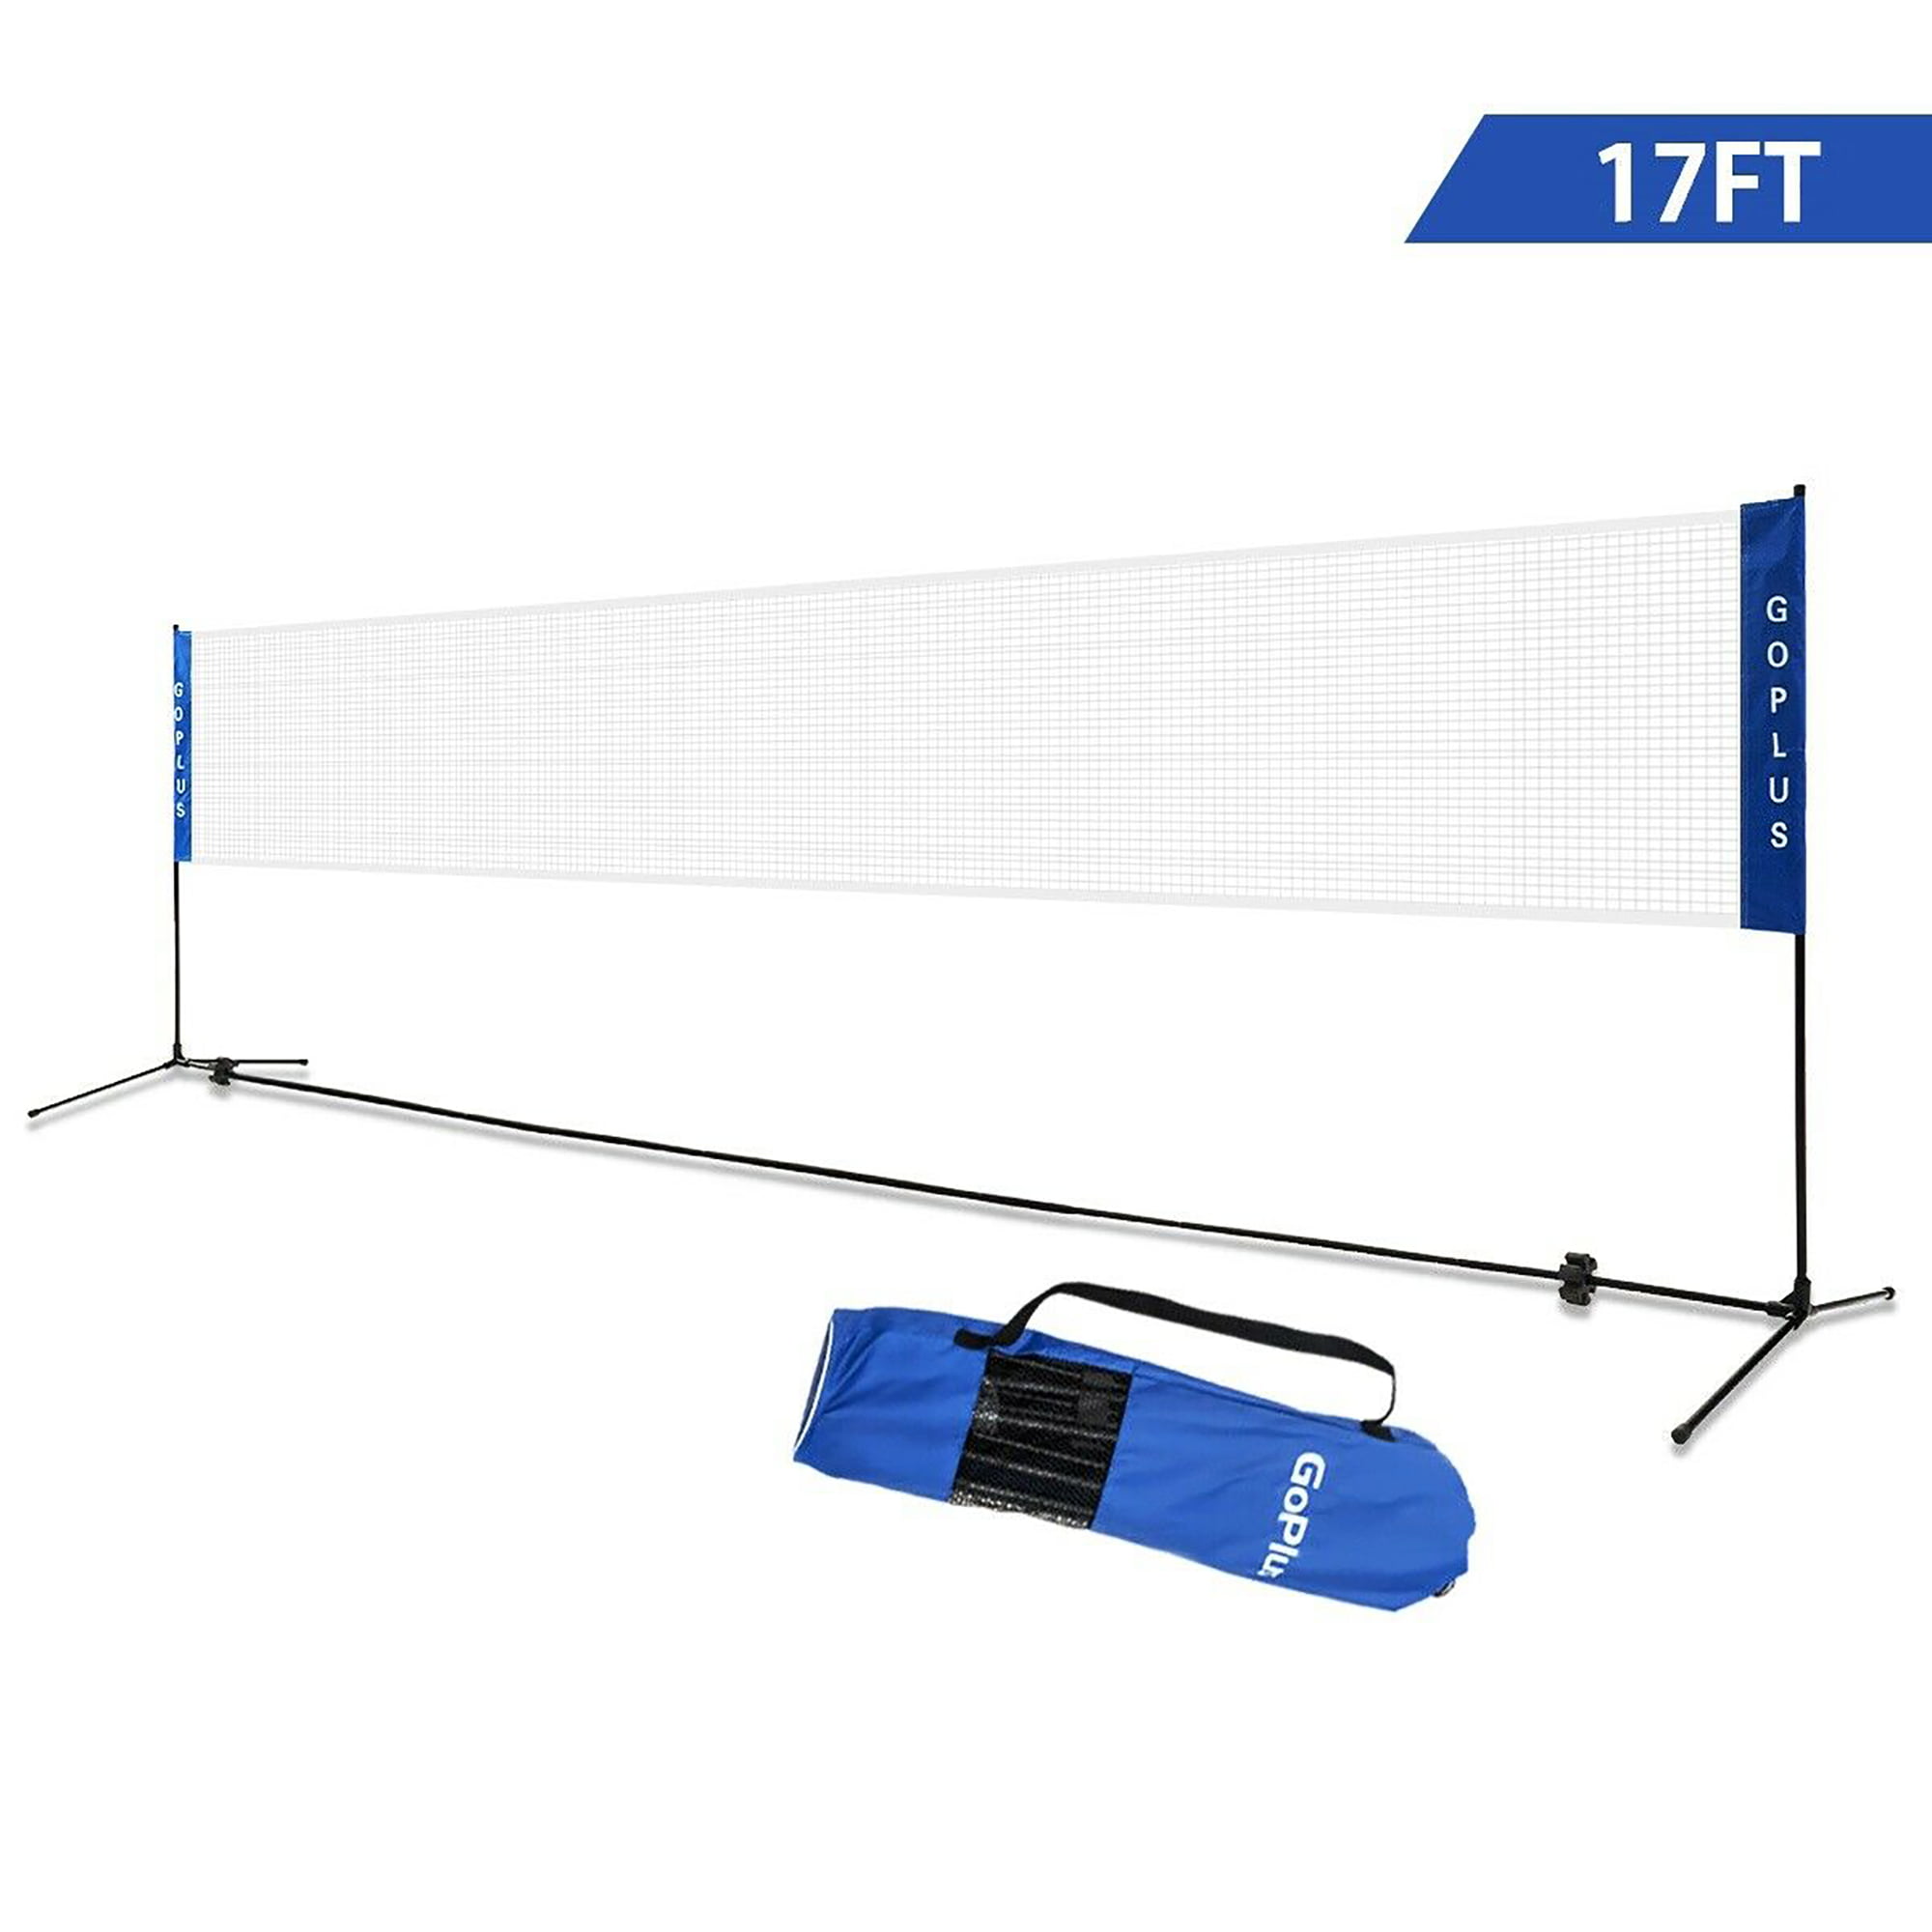 Portable Badminton Volleyball Tennis Net Set with Stand/Frame Carry Bag 